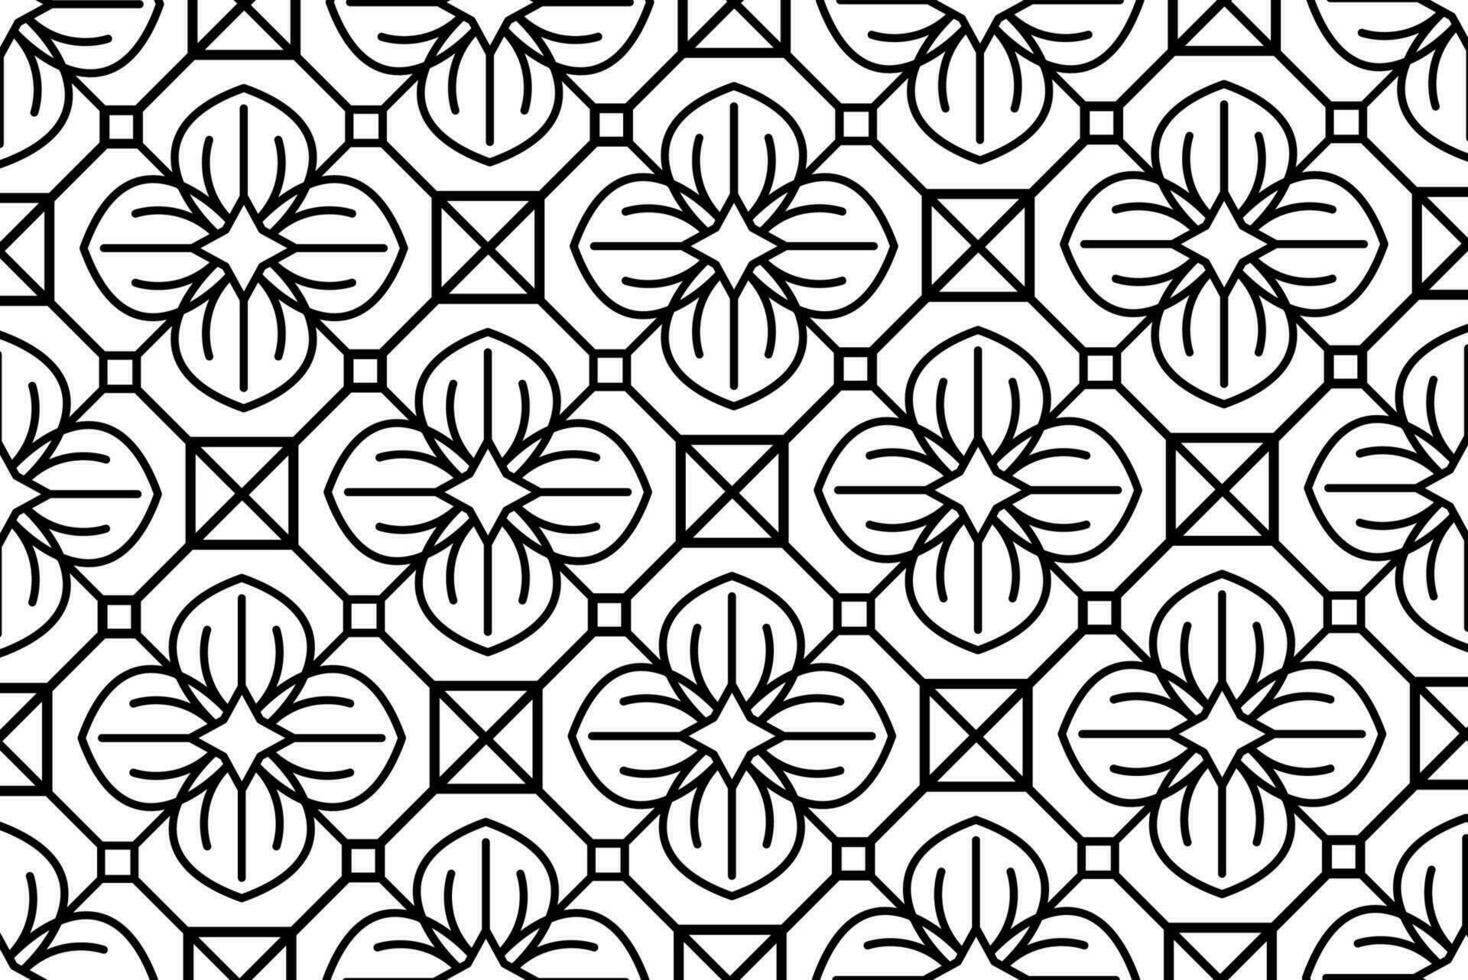 Abstract floral, lace, trim seamless pattern. Repeating pattern with floral elements and ornaments. Line art design, mandala pattern. vector